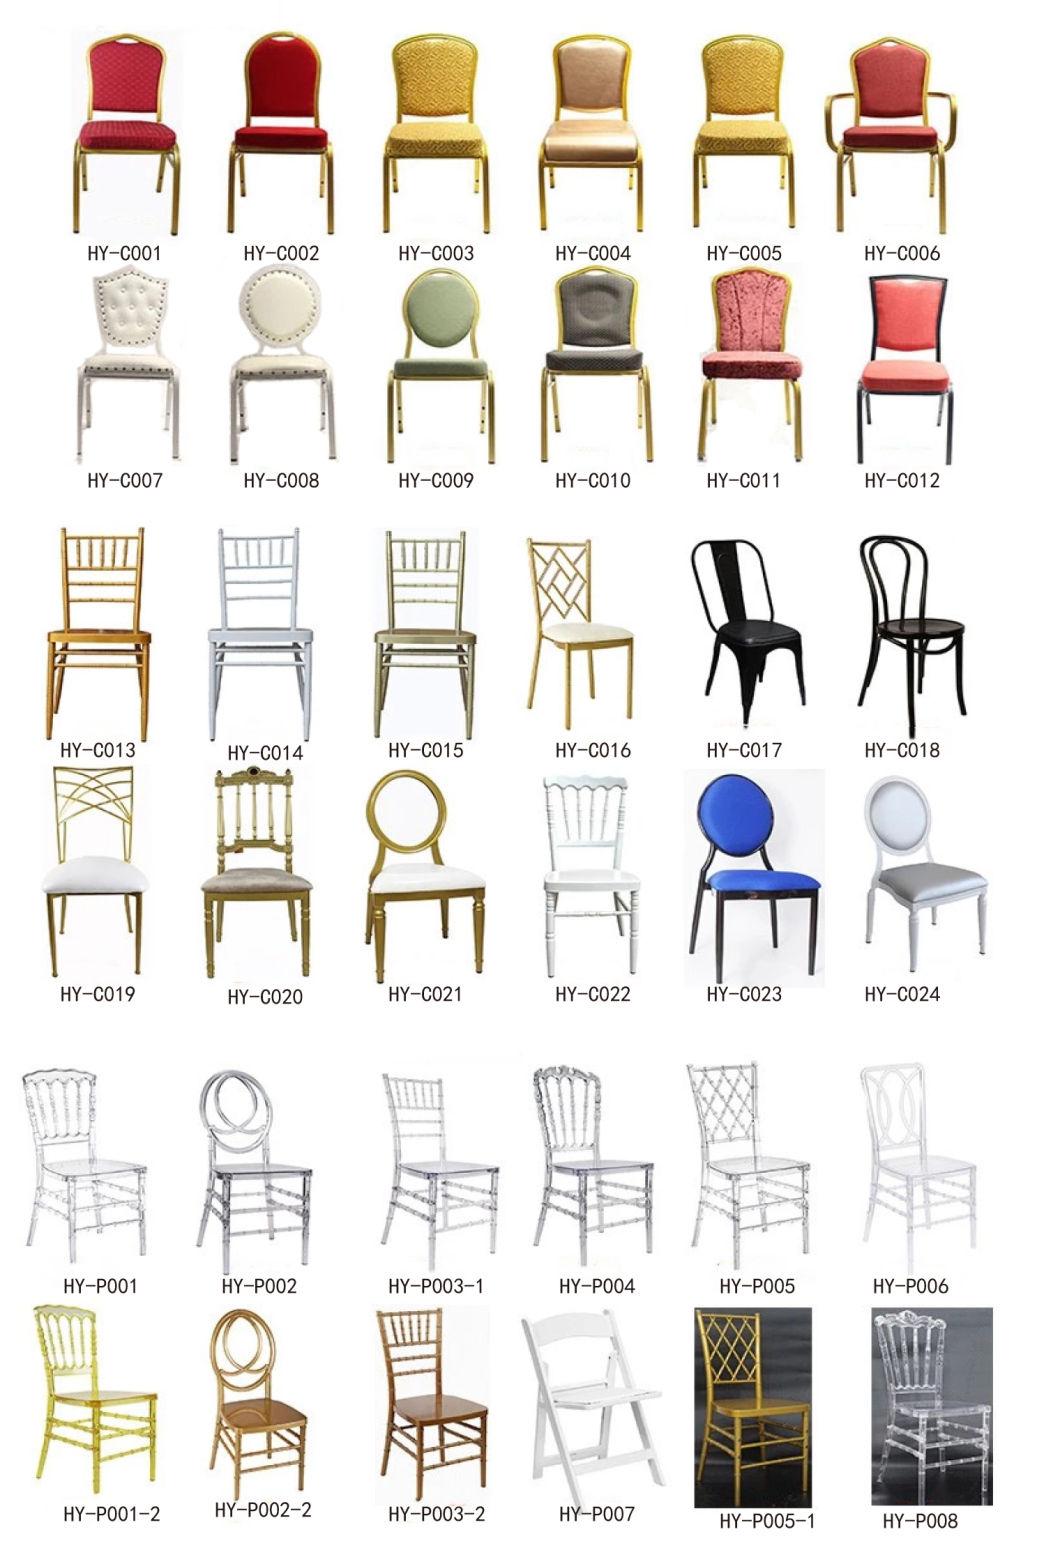 Modern Wedding Chairs Back Decor Chair Best Quality White Cover Seat Circle Stainless Steel High Back Dining Chairs